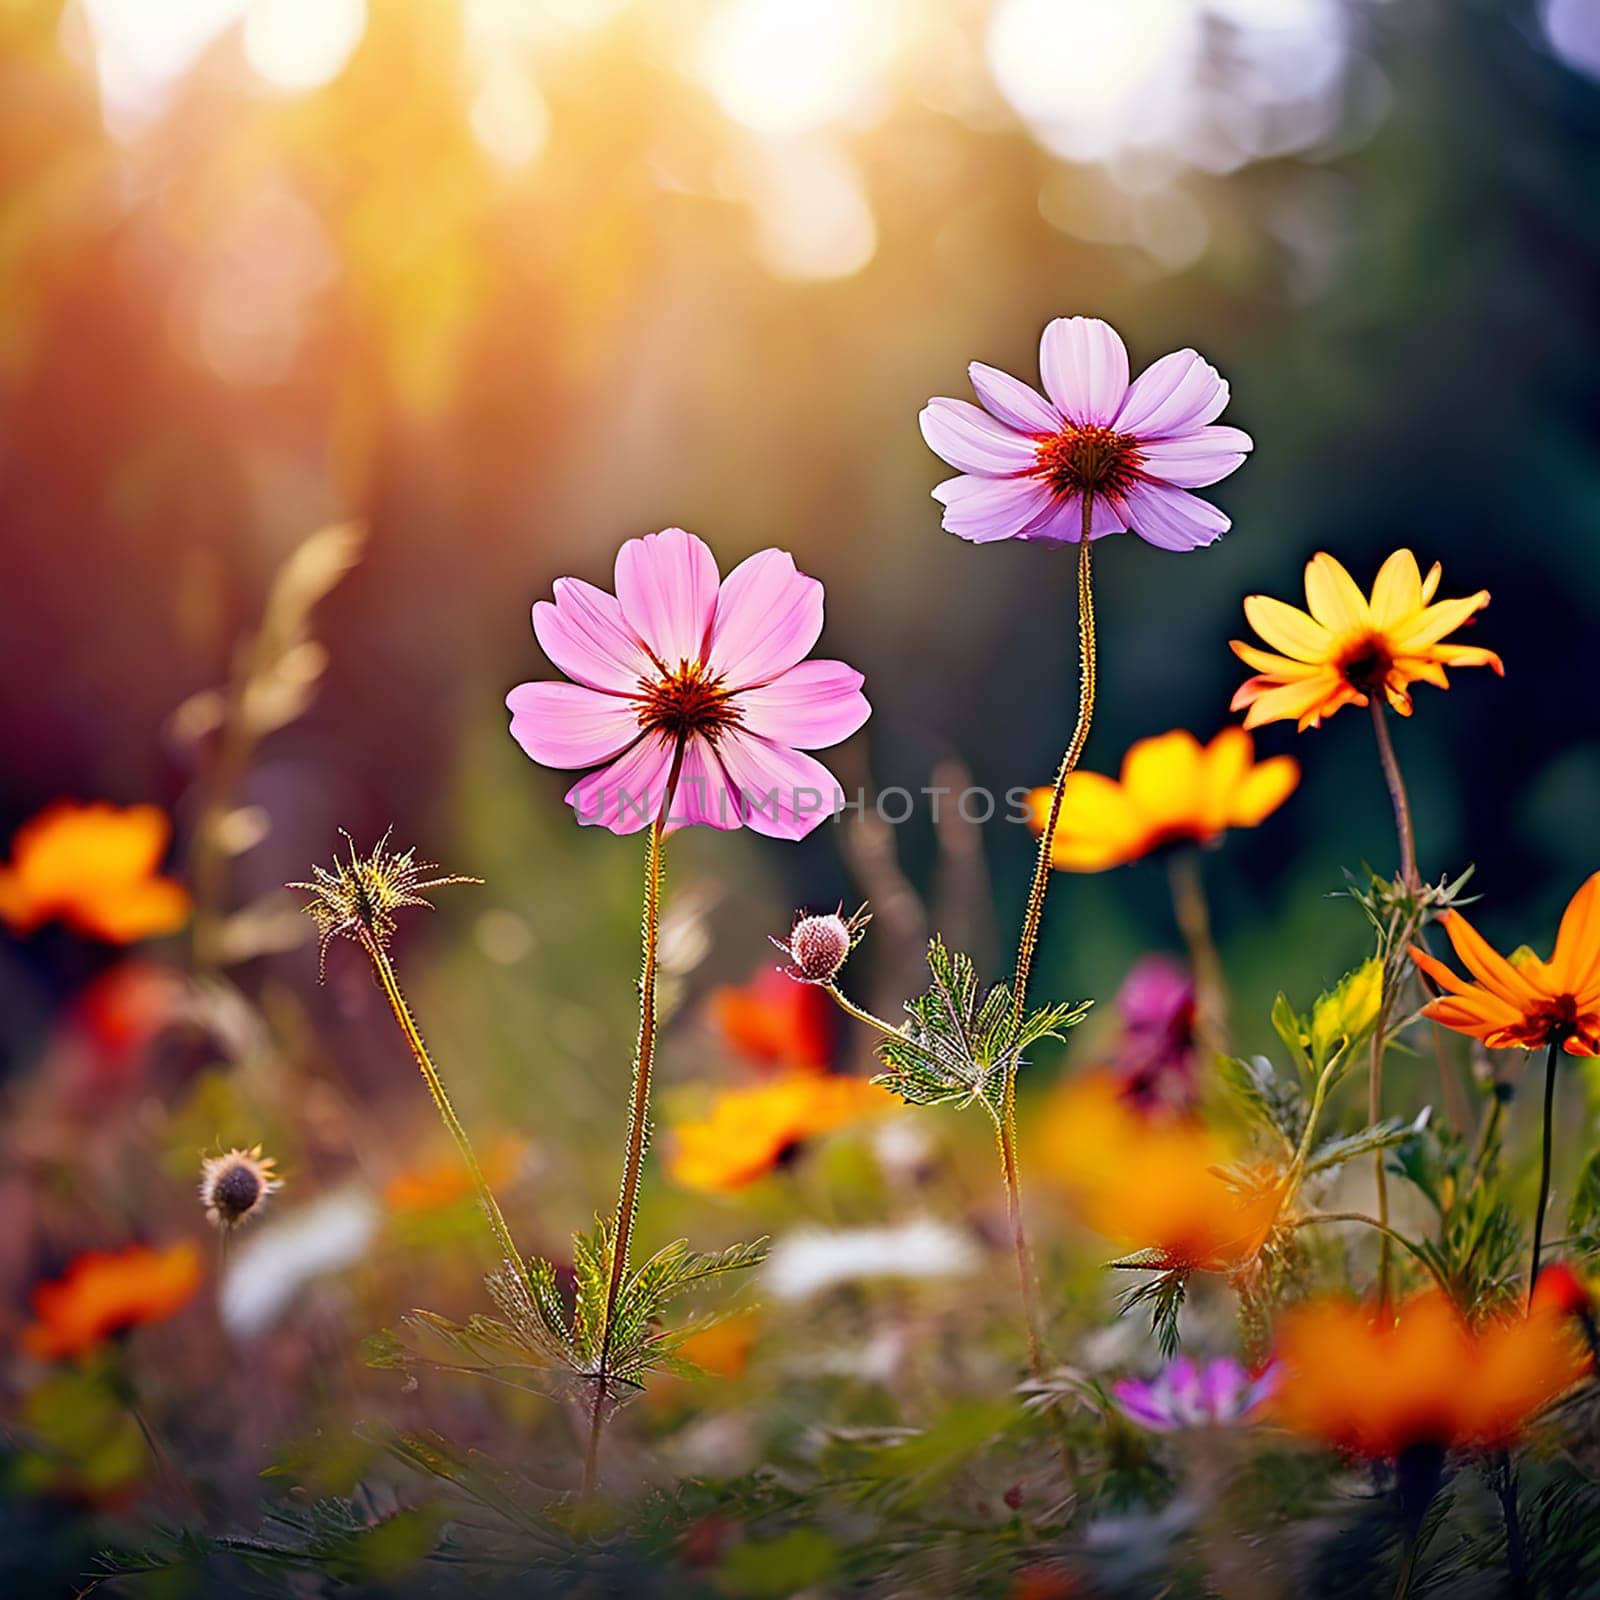 Nature's Splendor: Wild Flowers on Summer or Autumn Nature Background, Perfect for Website